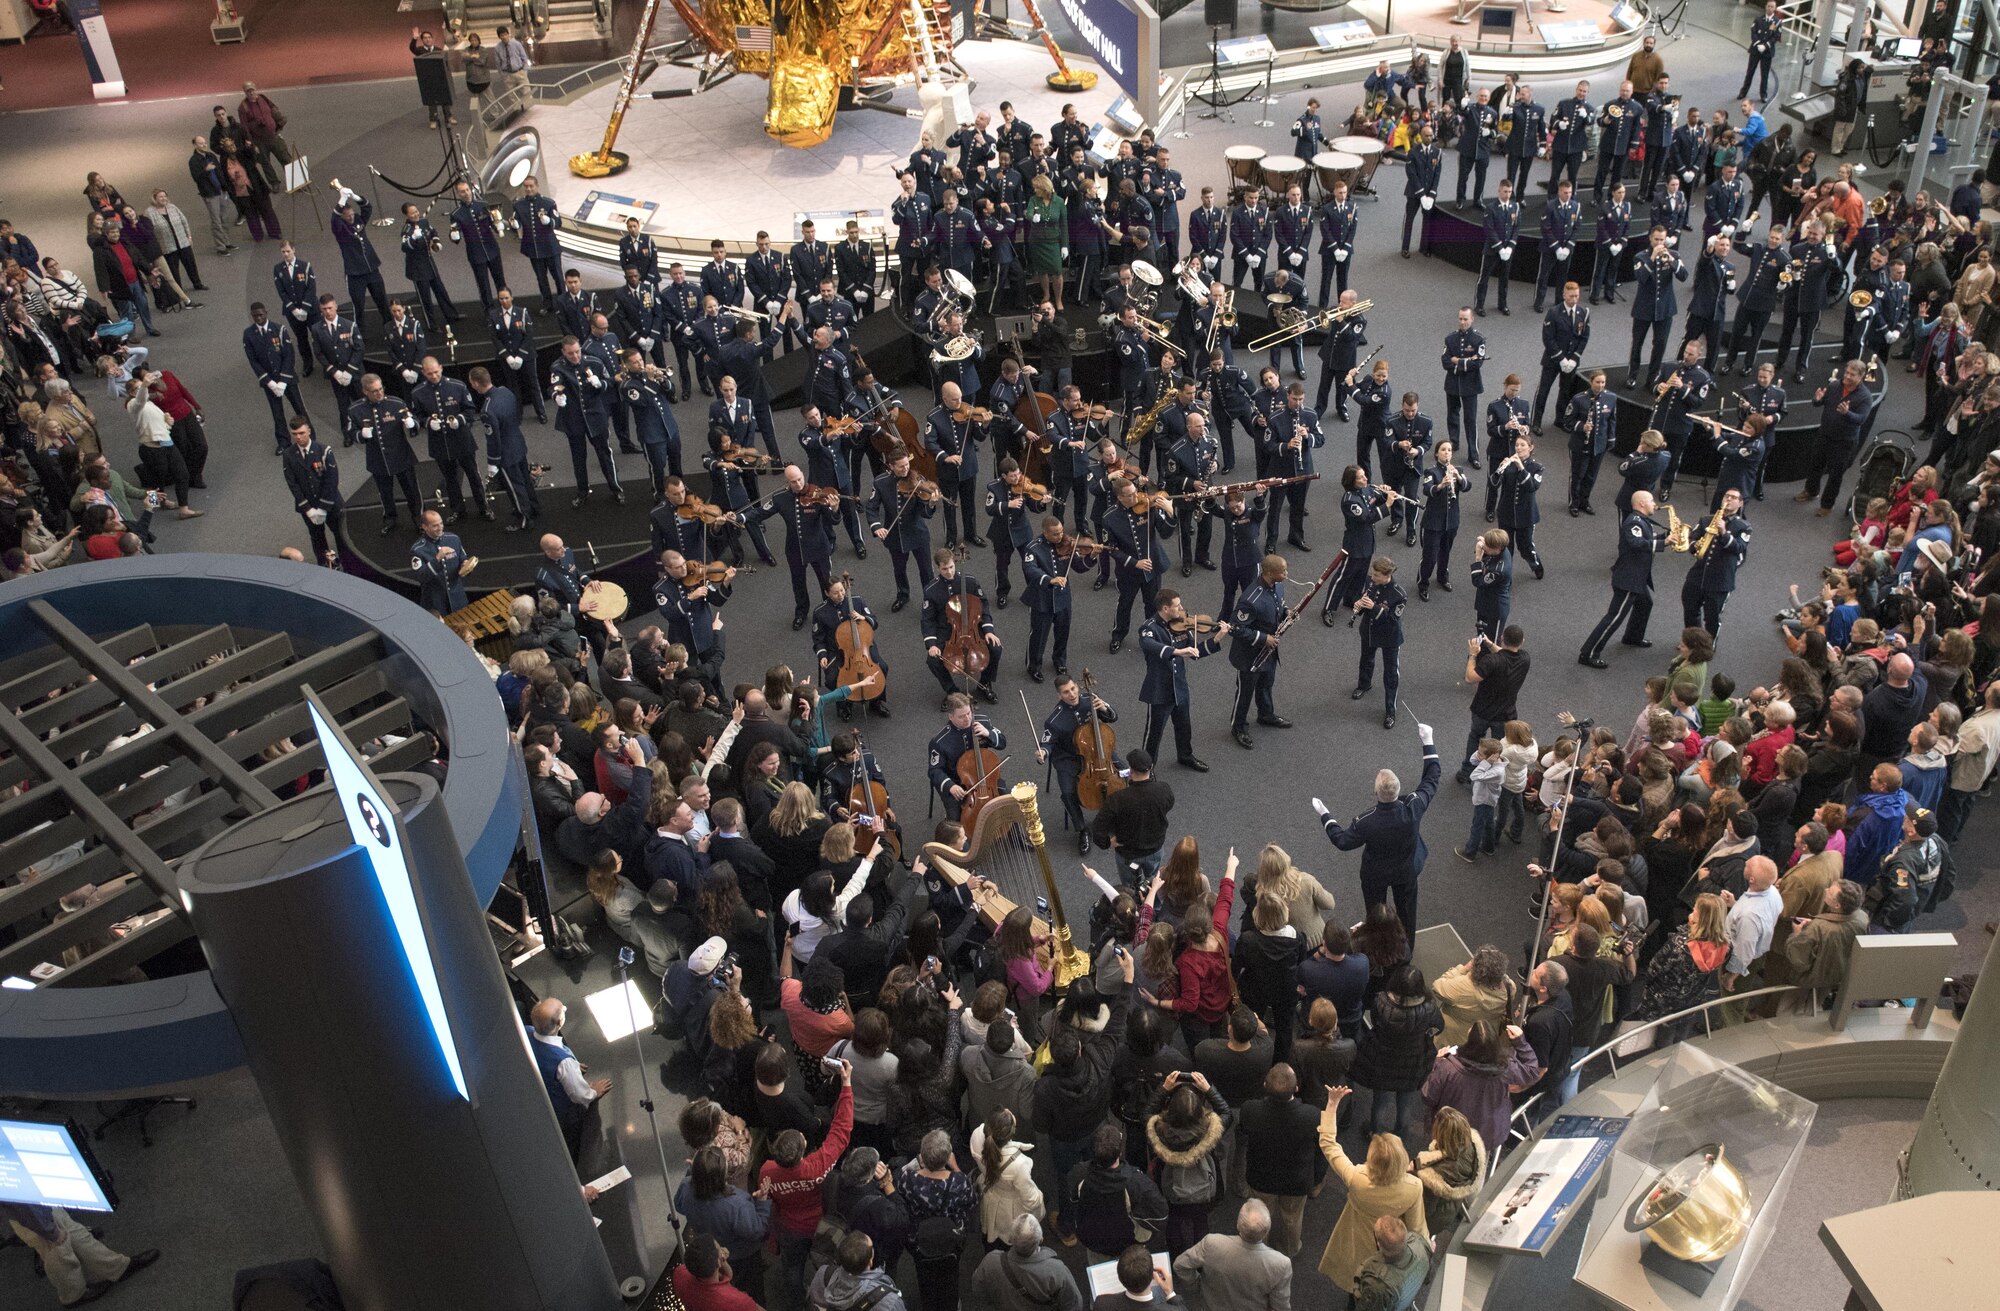 U.S. Air Force Band Commander Col. Larry H. Lang conducts the band's annual holiday flash mob performance at the Smithsonian National Air and Space Museum in Washington, D.C., Nov. 29, 2016. (U.S. Air Force by Airman Gabrielle Spalding)(released)